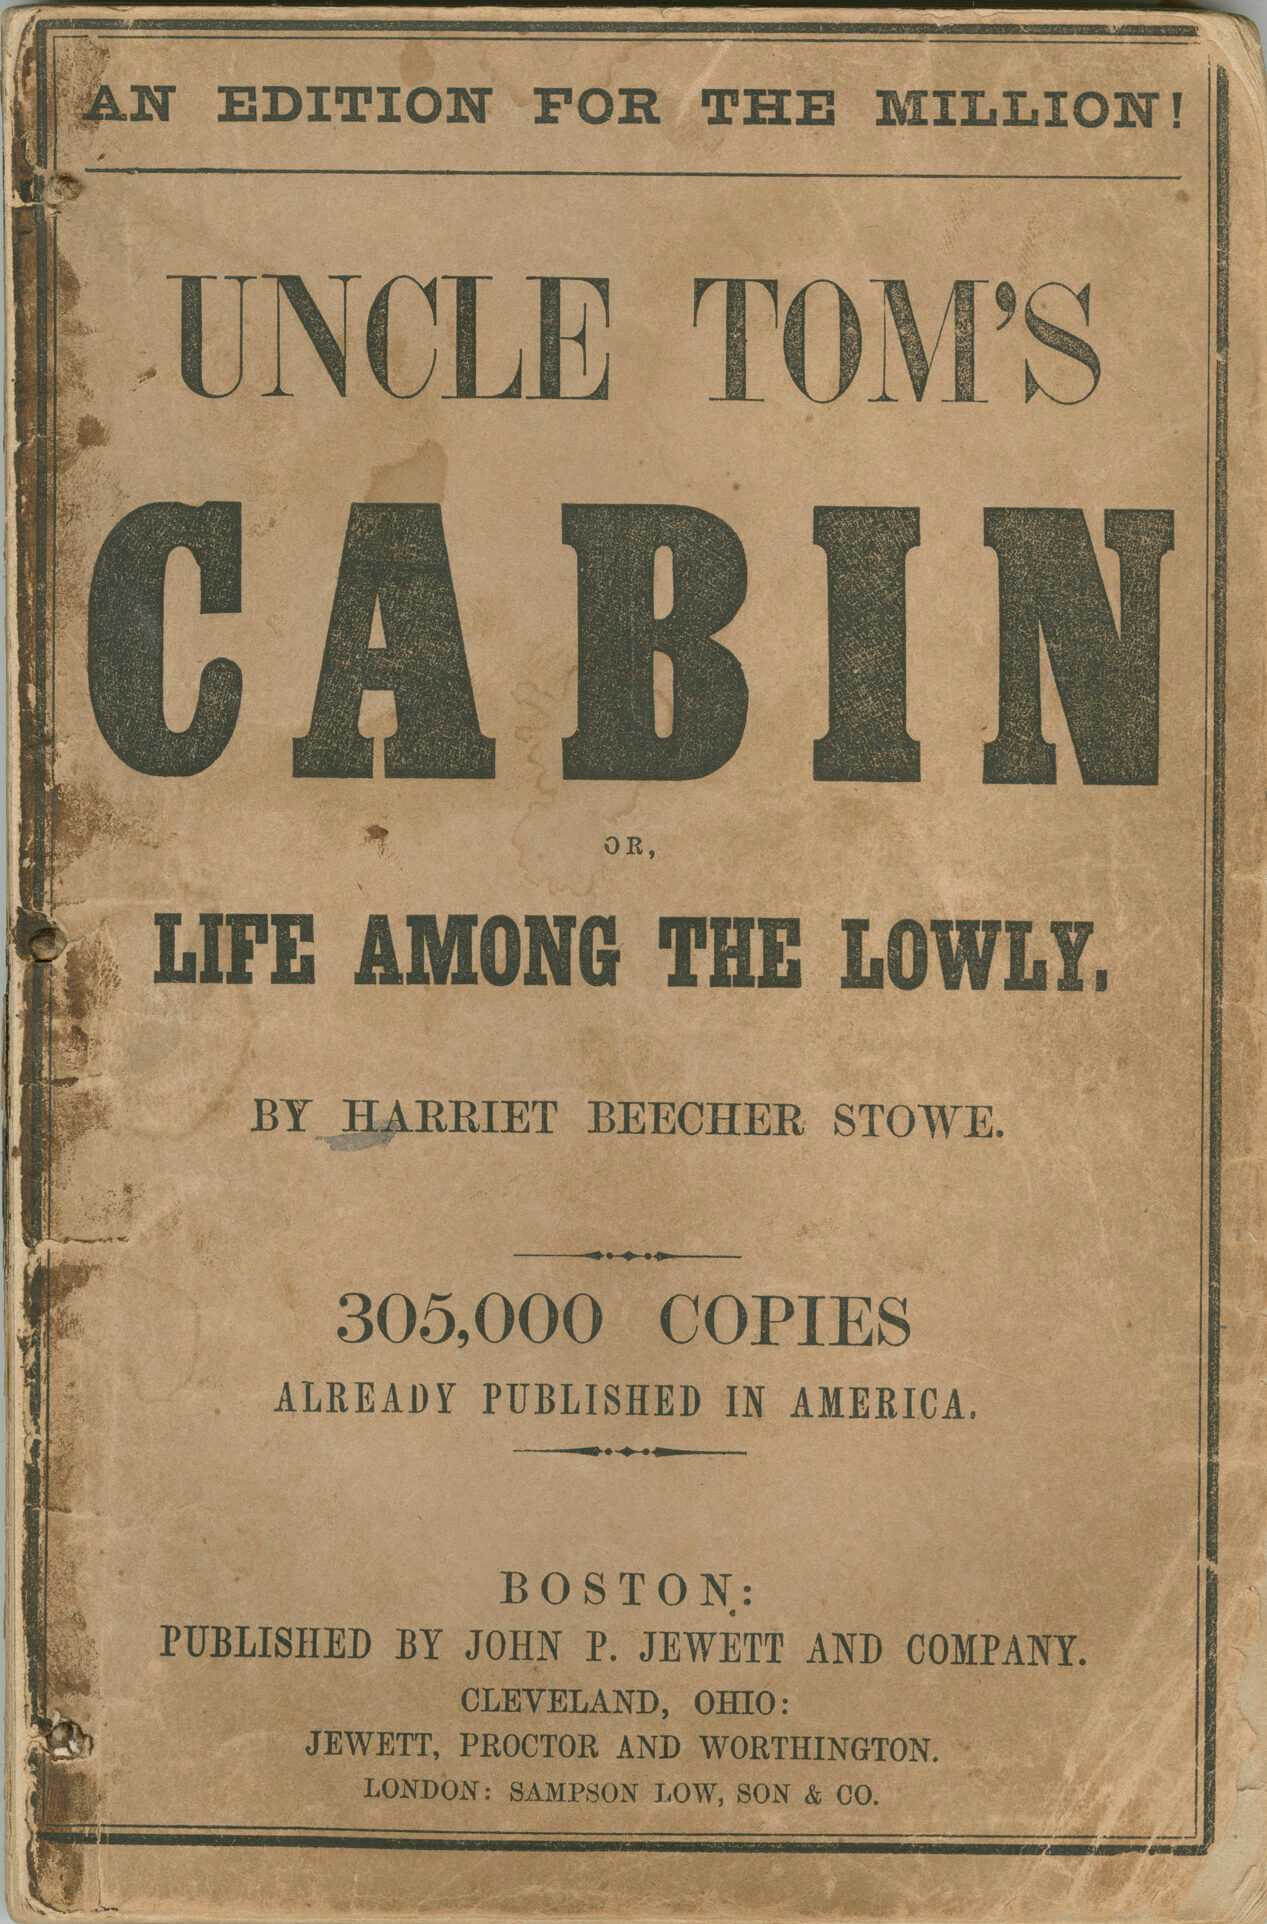 This book is a first edition of the anti-slavery novel Uncle Tom's Cabin; or, Life Among the Lowly, by Harriet Beecher Stowe. It has paper covers and is printed in black-and-white throughout, with the text of the novel printed in two columns on each page. Adhesive residue on the left side of the front and back covers indicates a lost binding cover. The back cover features a list of other items available from the publisher, John P. Jewett & Company.